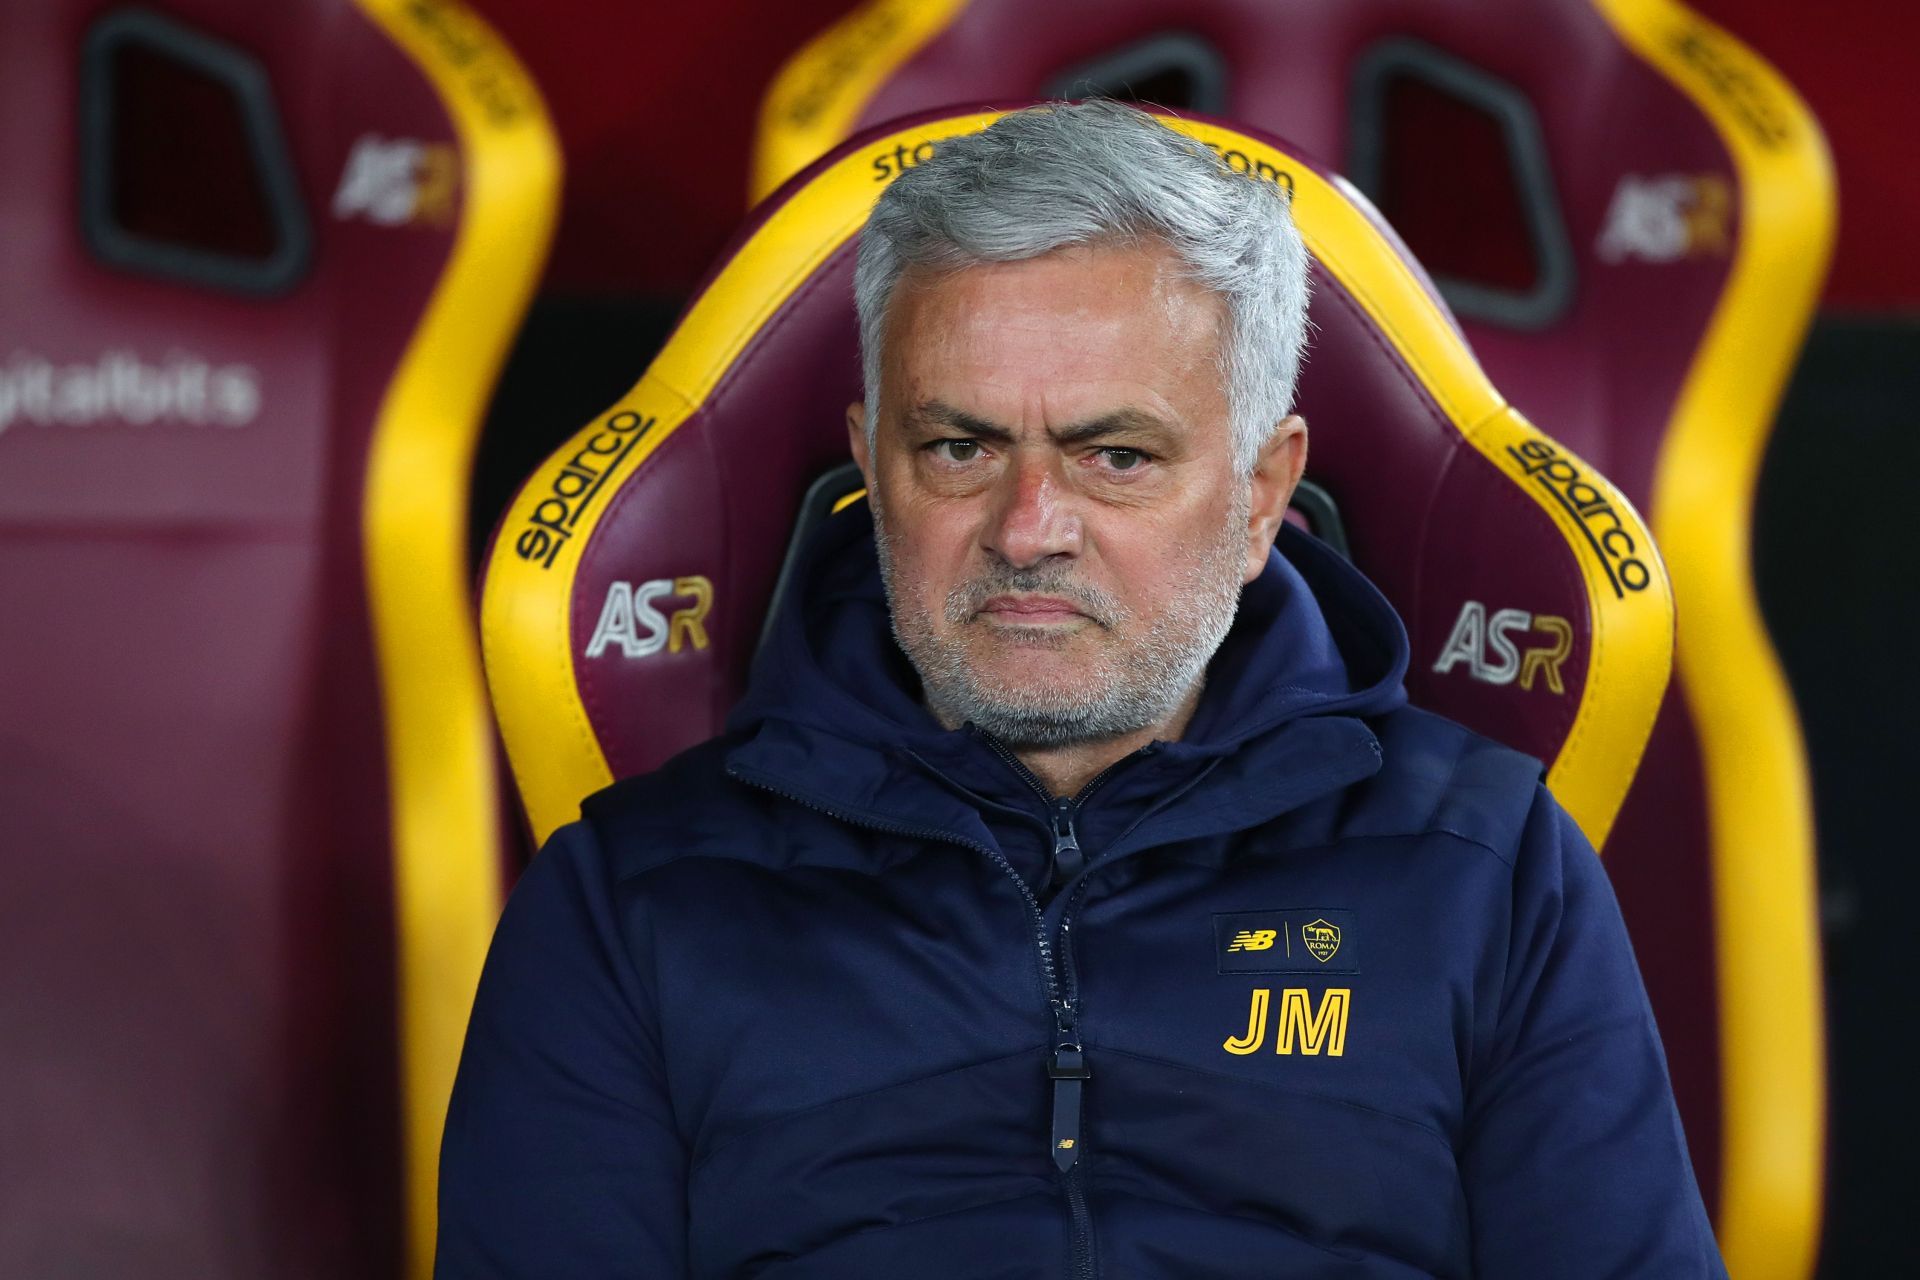 Jose Mourinho is said to be disinterested in the PSG job.